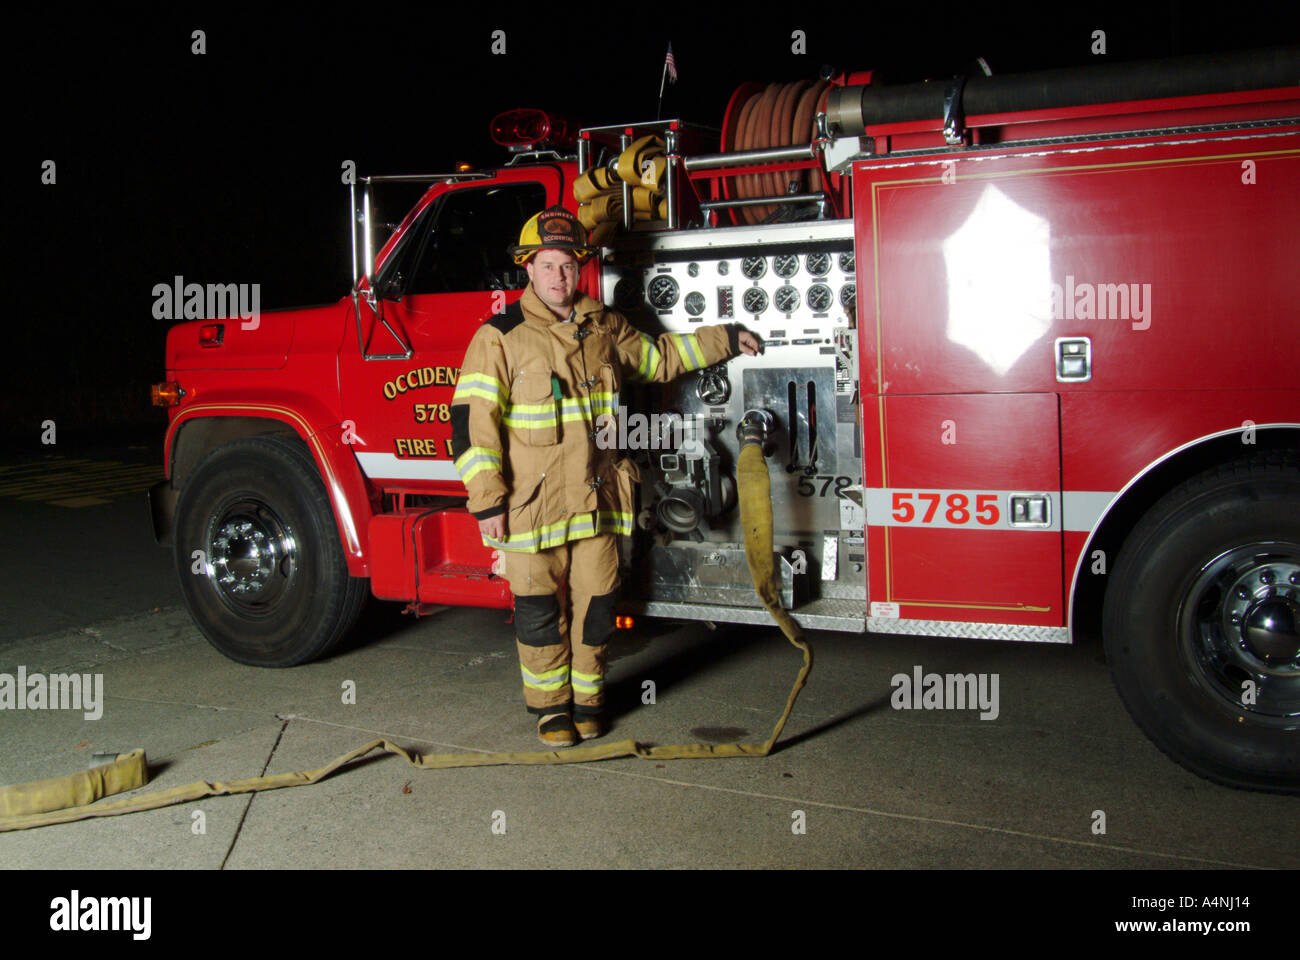 A fire fighter stands next to a fire engine with the Occidental Volunteer Fire Department Occidental California MR L 022p Stock Photo